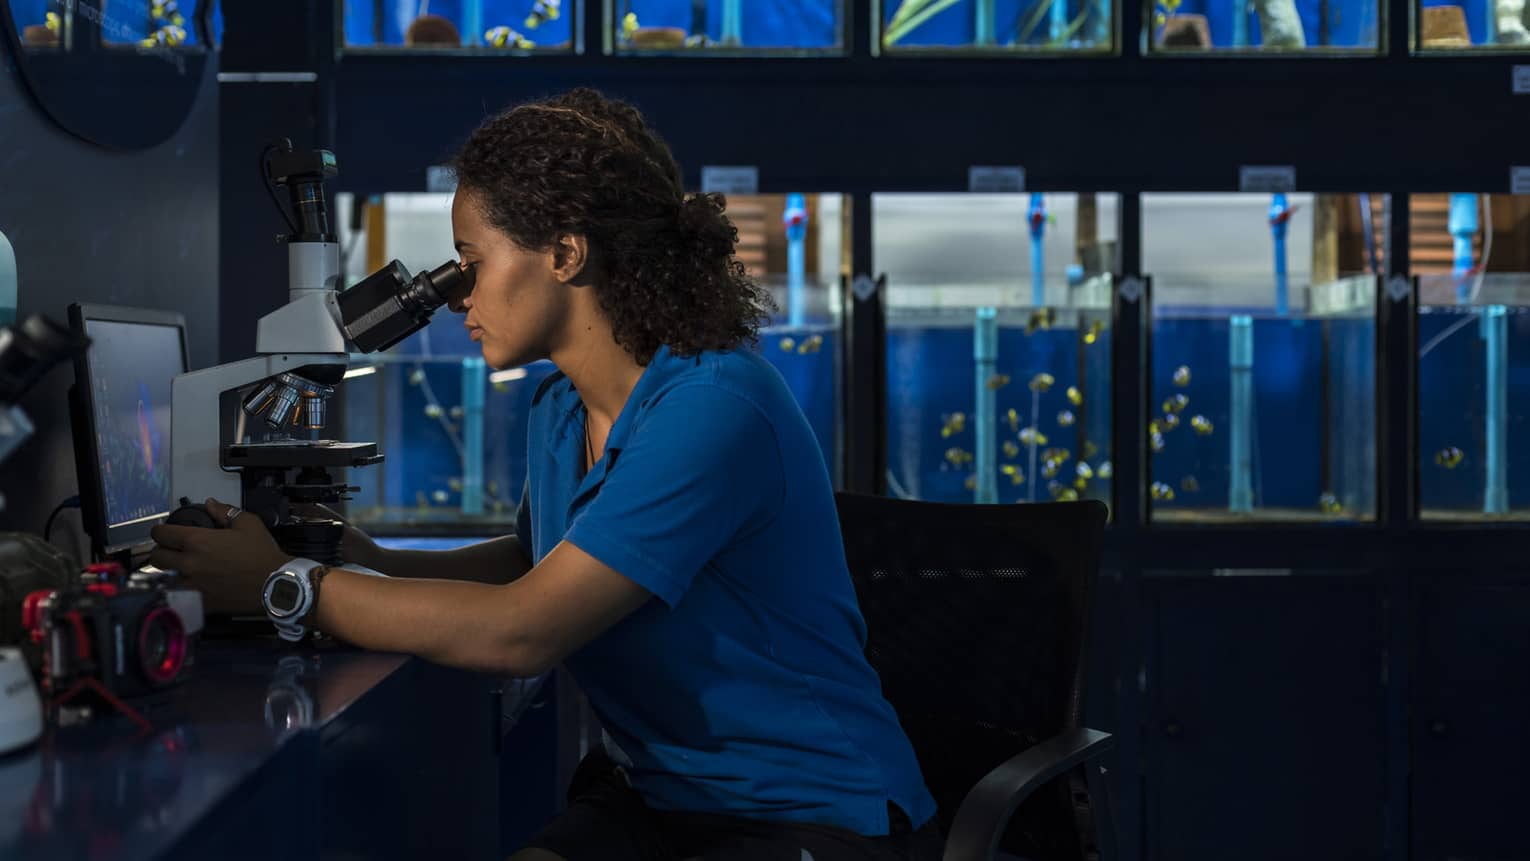 Woman in royal blue shirt looking into microscope